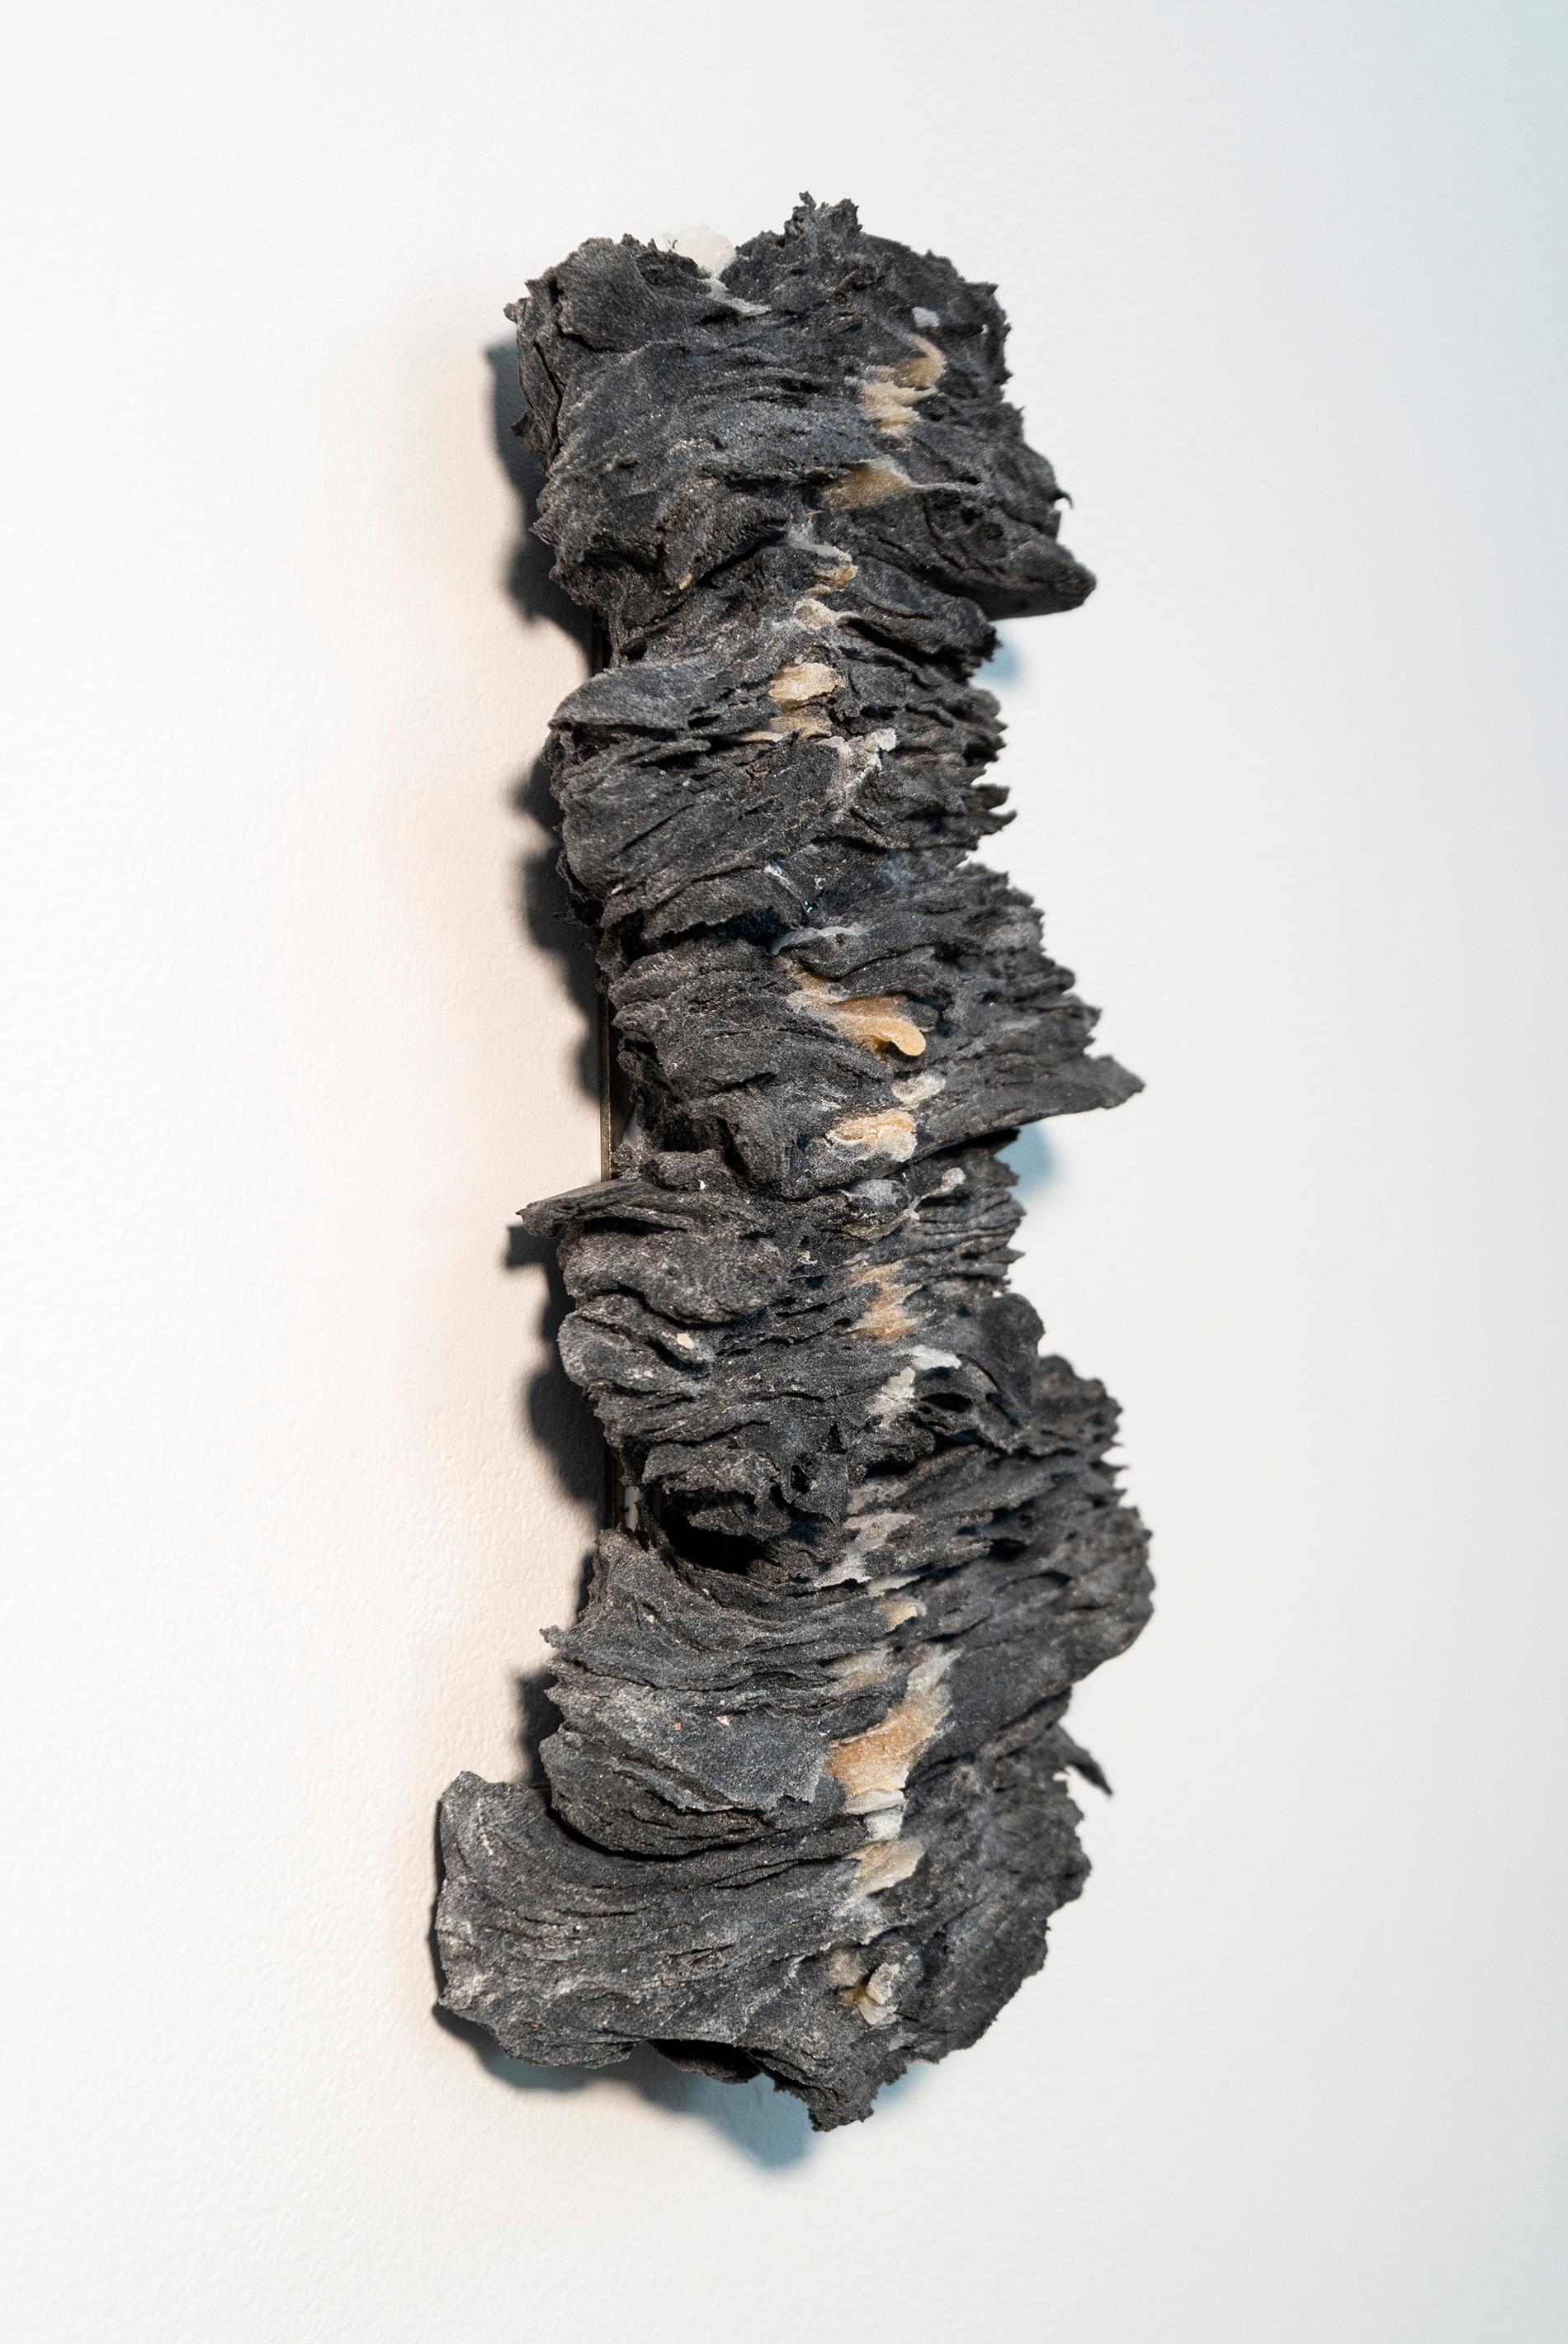 Cheryl Wilson-Smith’s striking textural wall sculptures are inspired by the remote rugged wilderness that surrounds her home in Northern Ontario. This is one of a series of finely layered glass frit (special ground glass) pieces in dark gray that